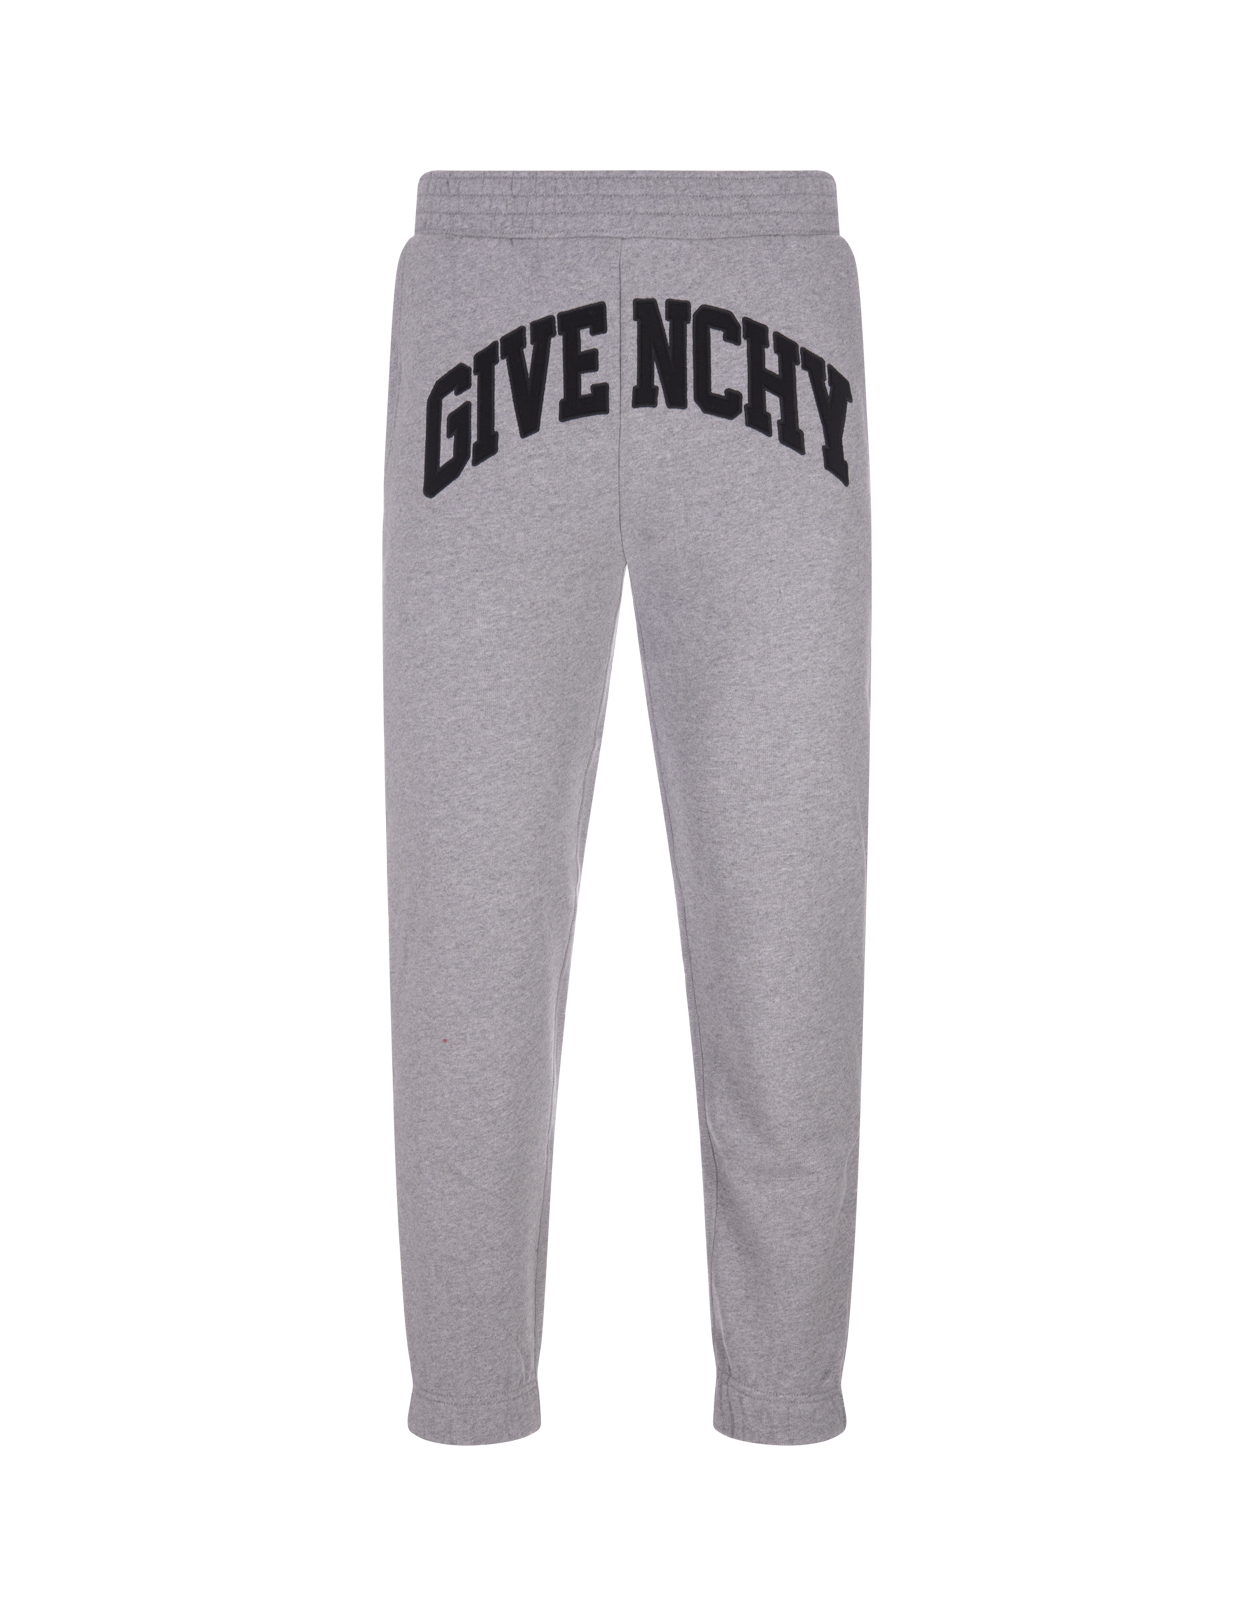 Grey Joggers With Black Front Logo - GIVENCHY - Russocapri